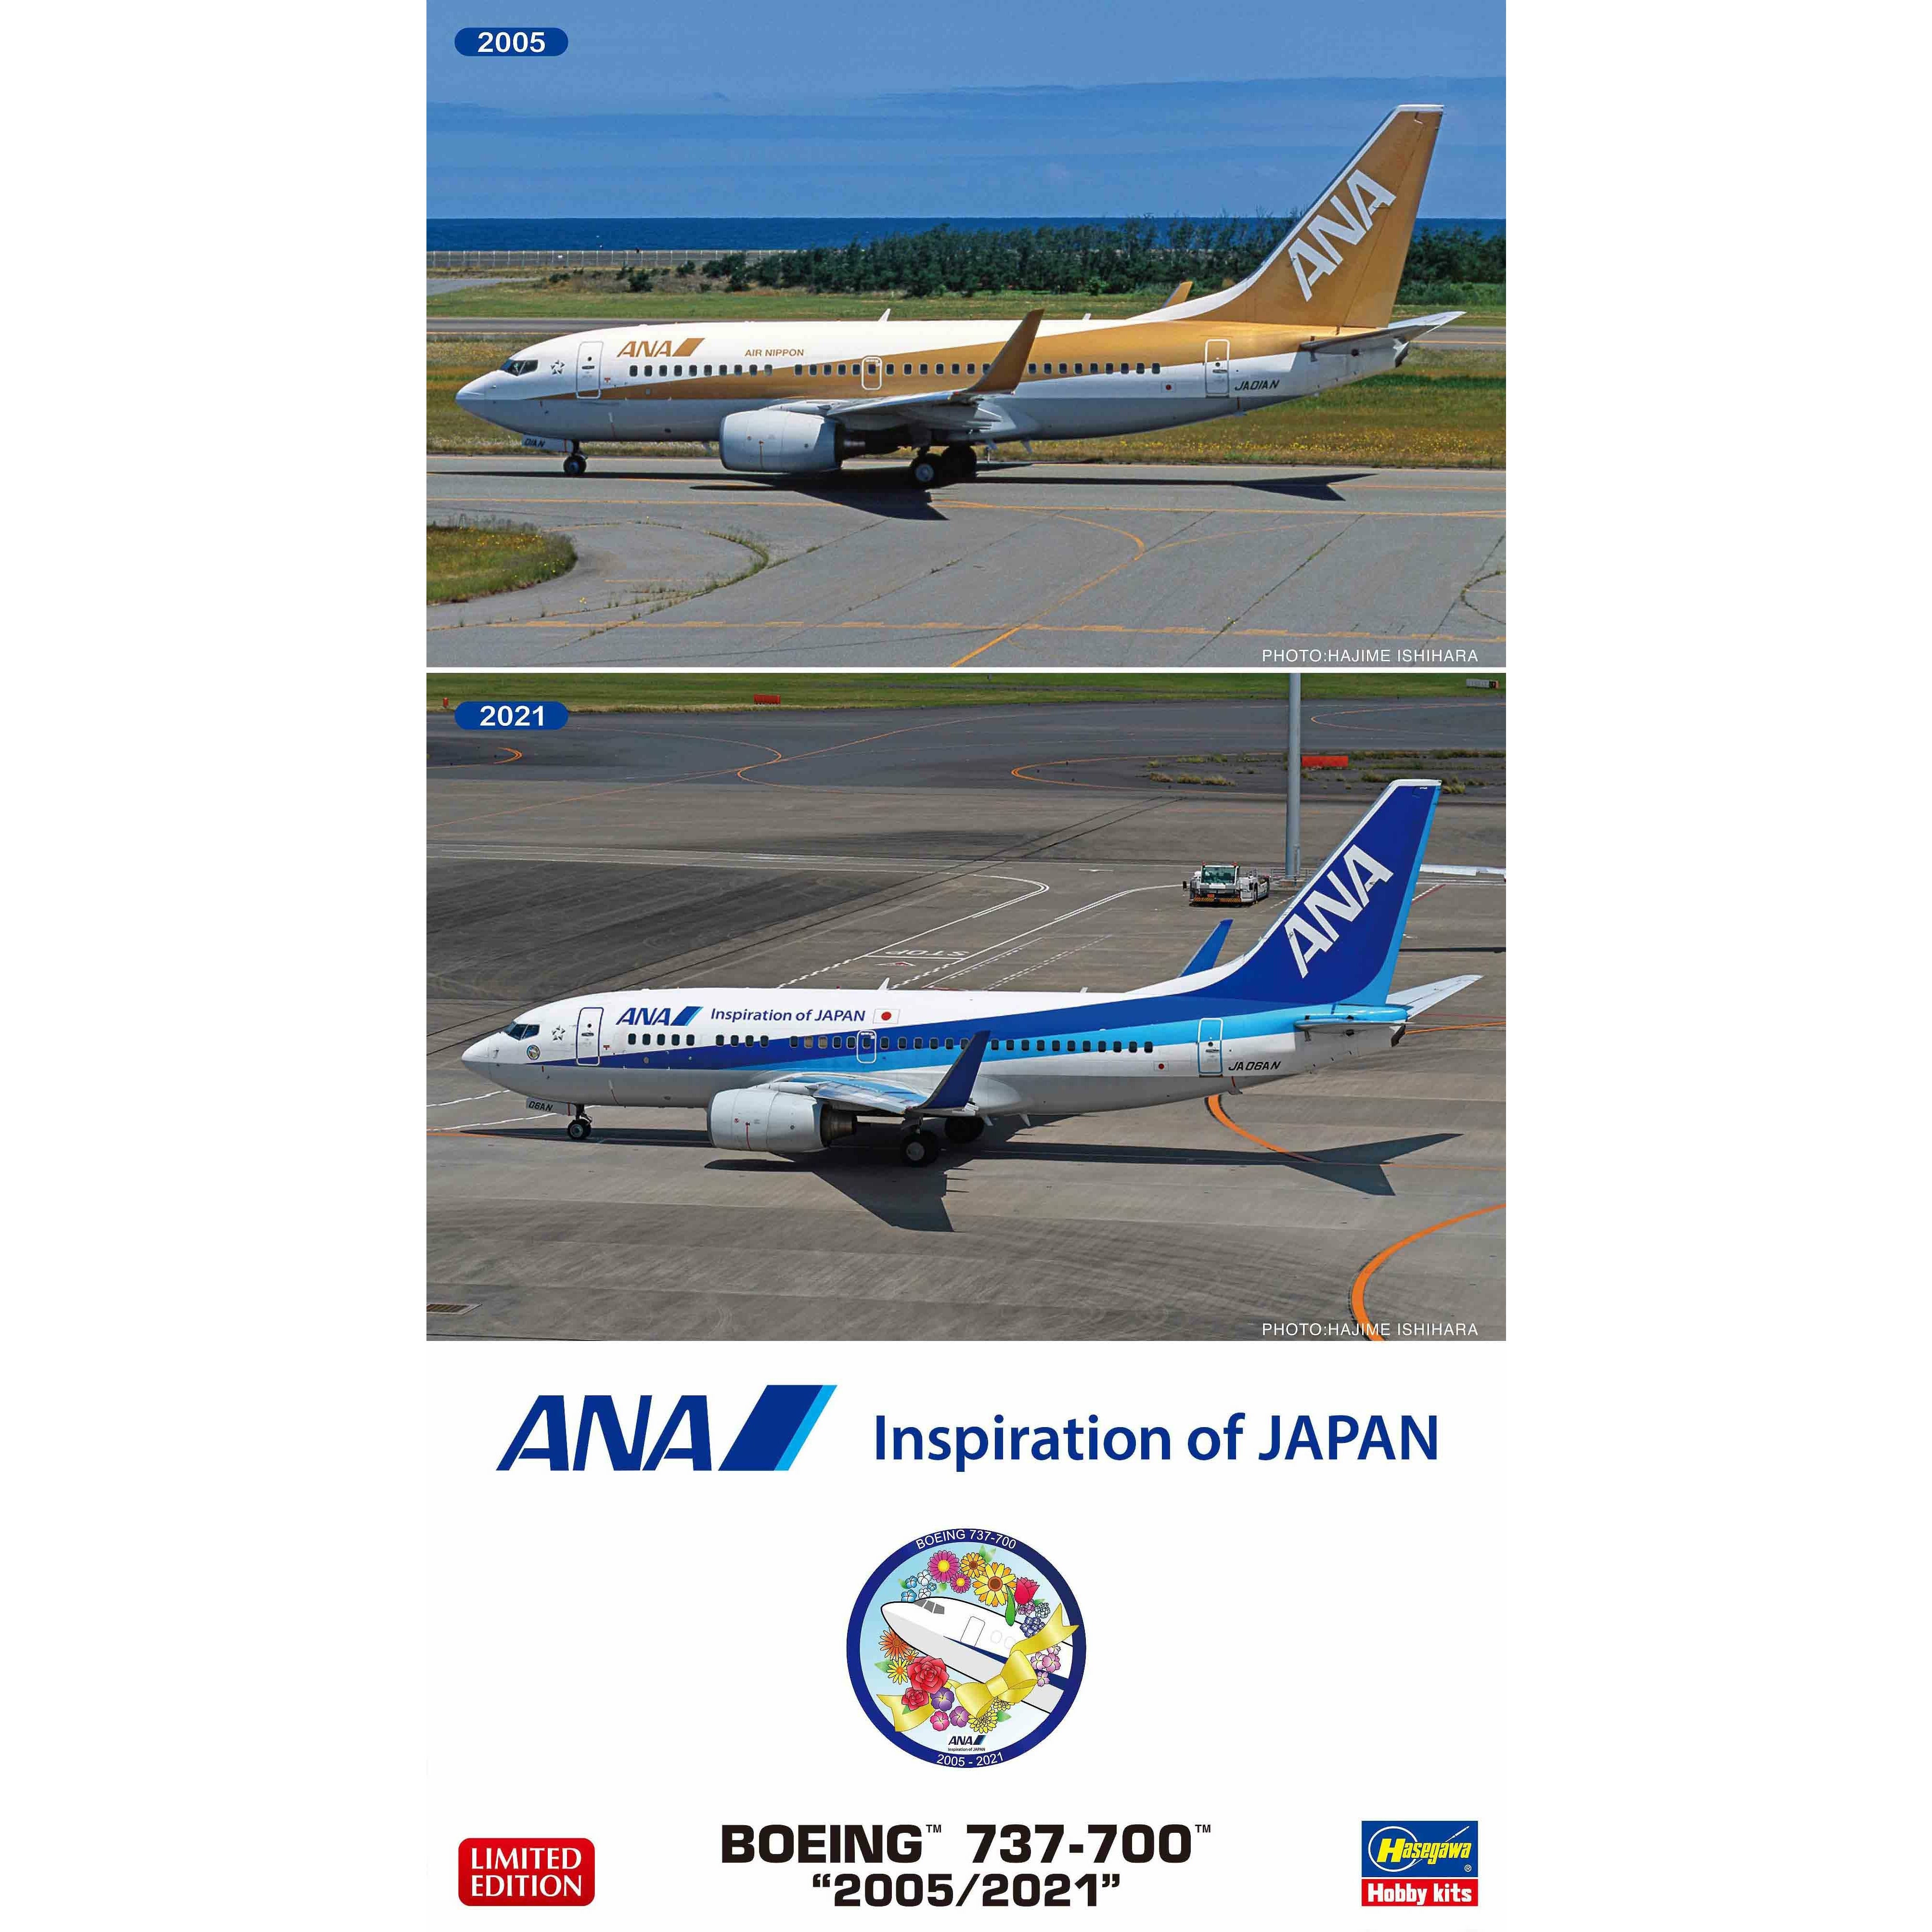 Ana Boeing 737-700 '2005/2021' (Two Kits In The Box) 1/200 #10845 by Hasegawa